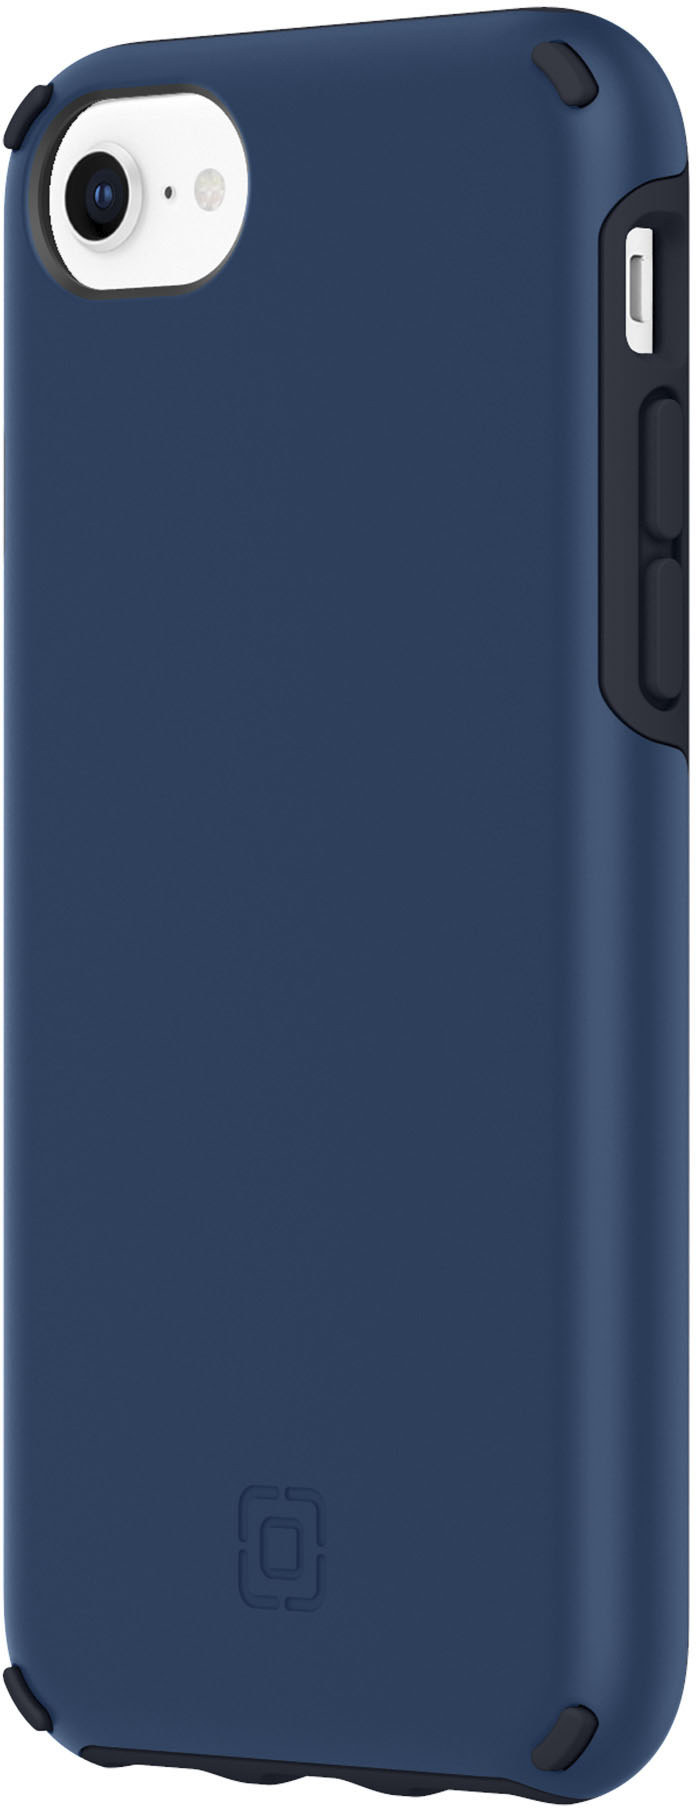 Angle View: Incipio - Duo Hard shell Case for Apple iPhone SE (3rd Generation) and iPhone 8/7/6/6s - Blue